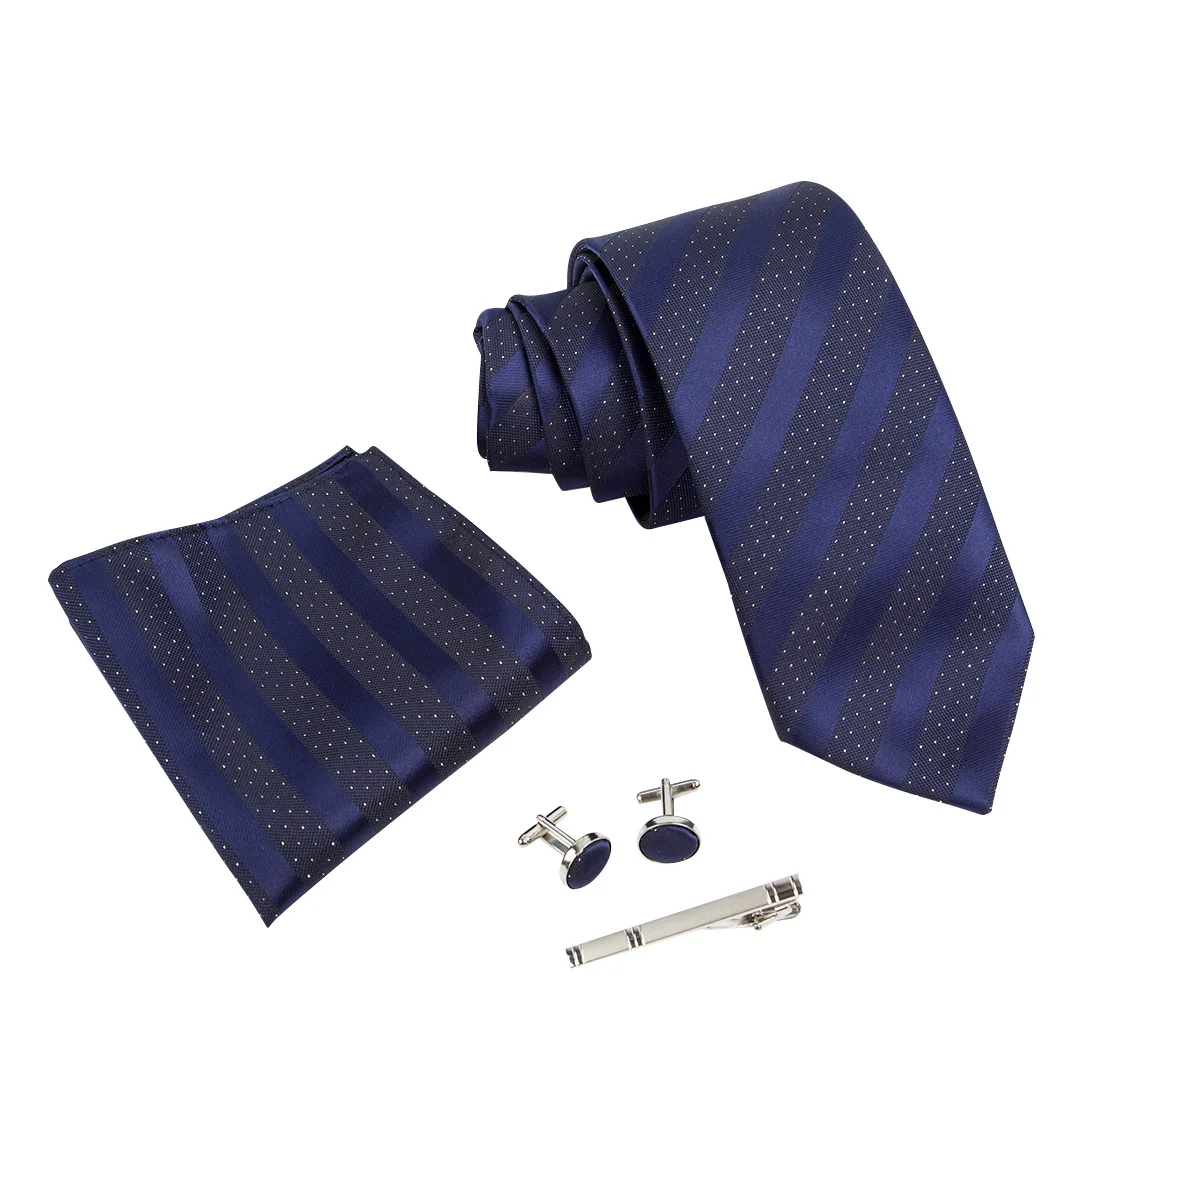 

Ikepeibao Men Navy Striped Plaid Necktie Sets Pocket Square With Metal Cufflinks Clip Fit Wedding Formal Workplace Black Red